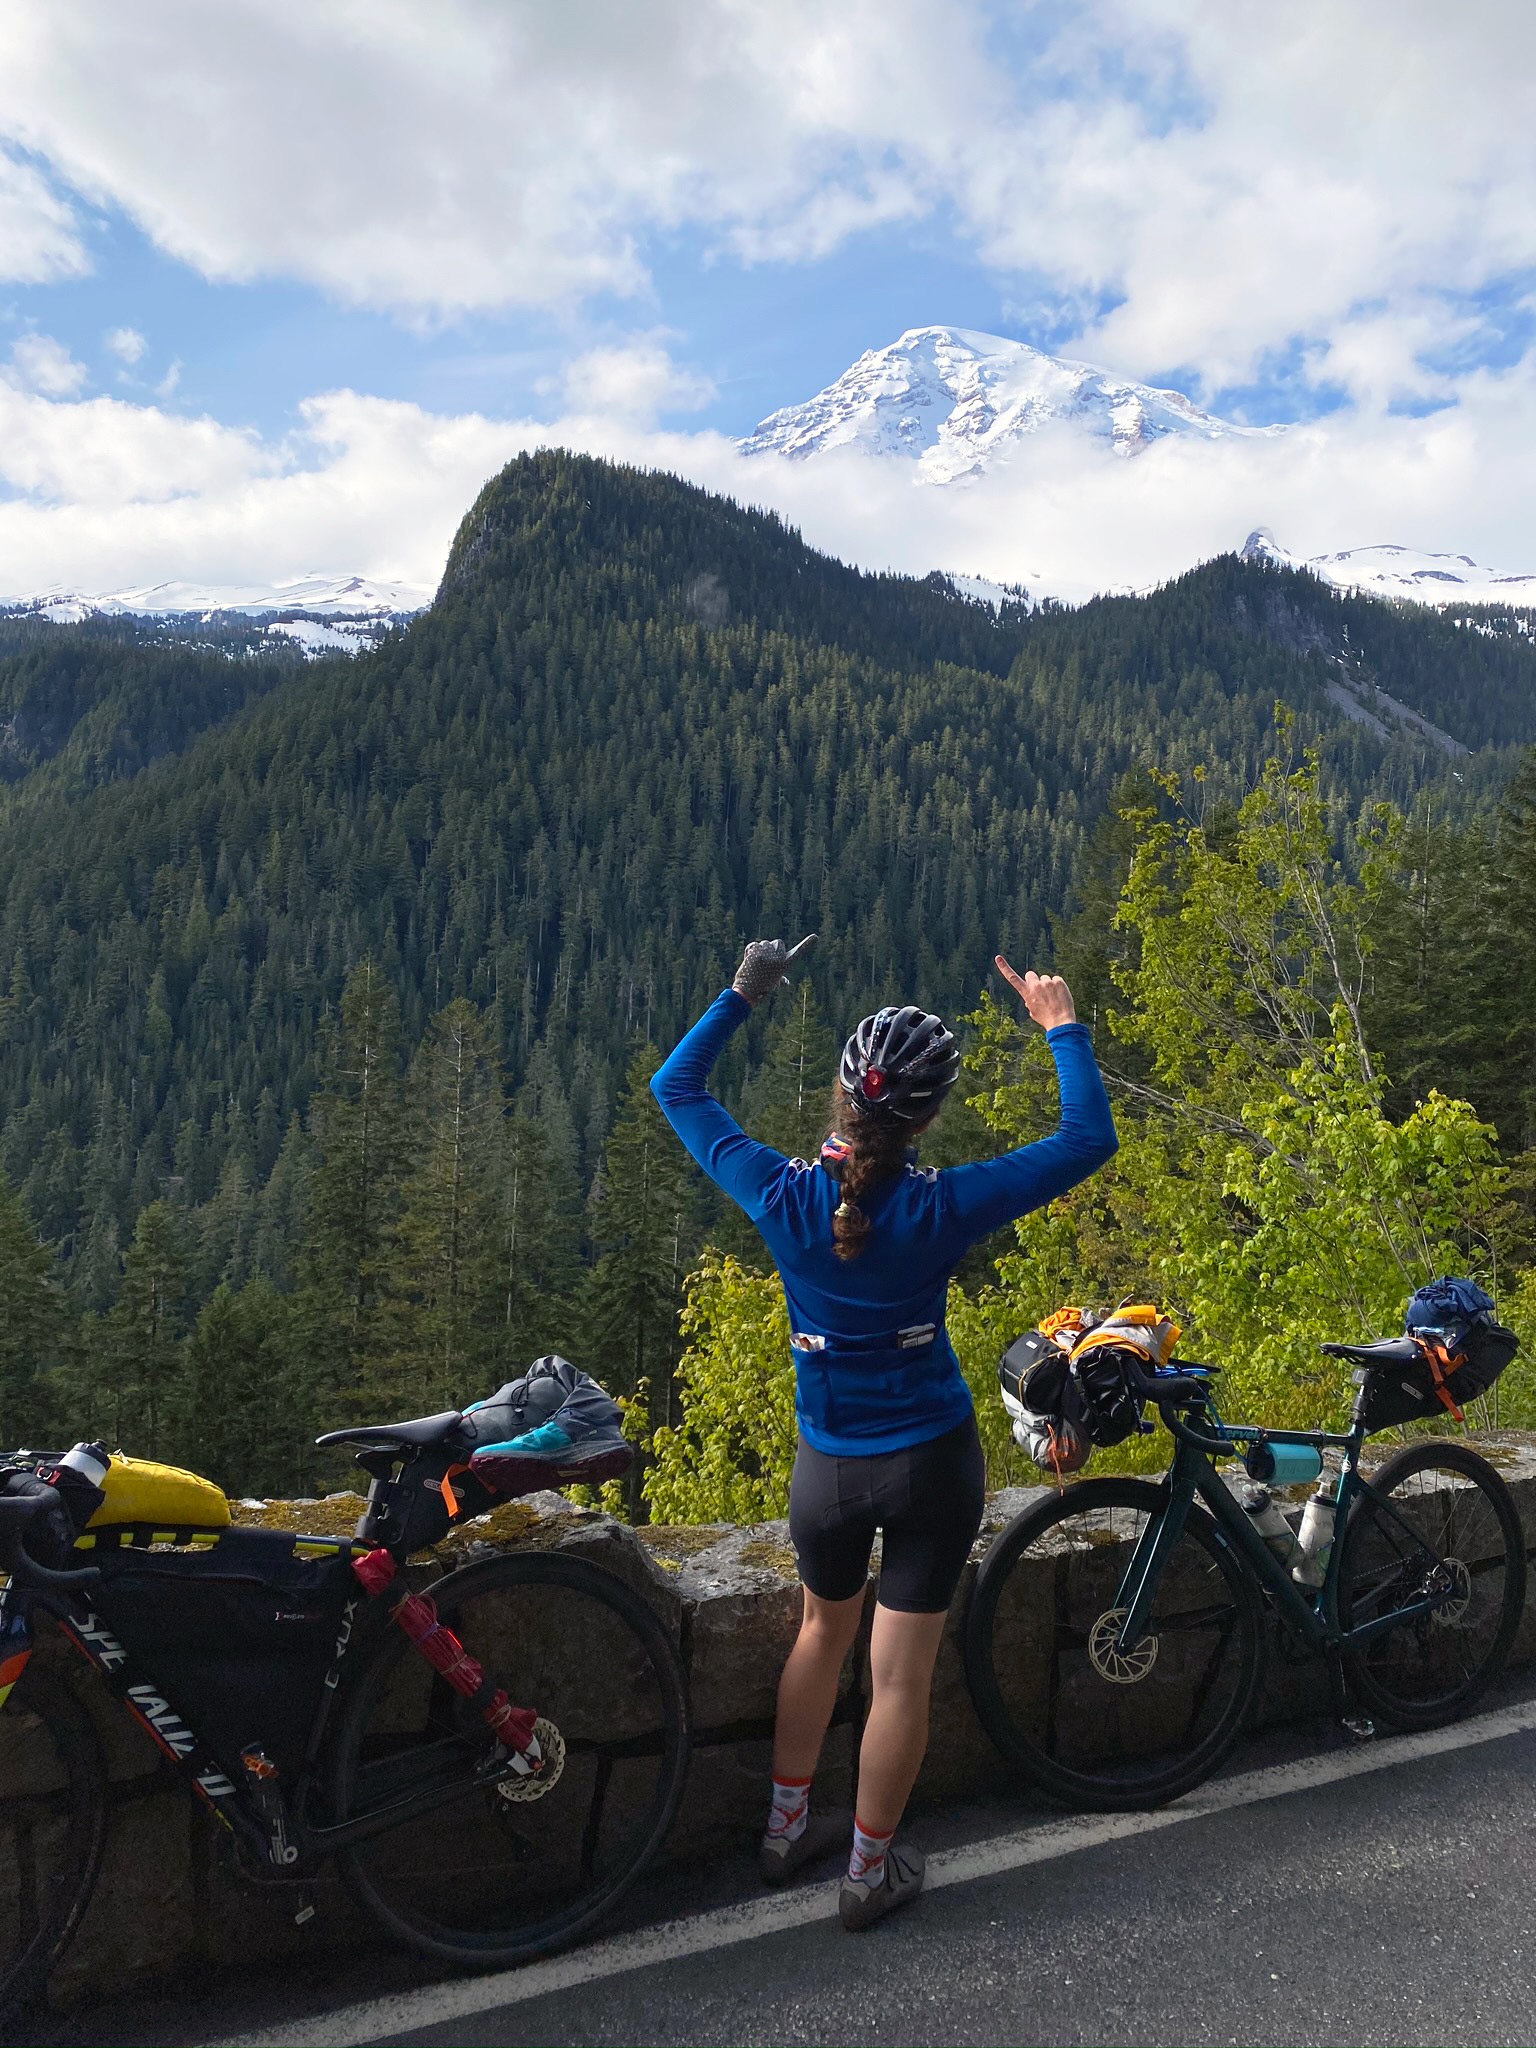 Mary points at Mount Rainier riding the Washington Parks II route